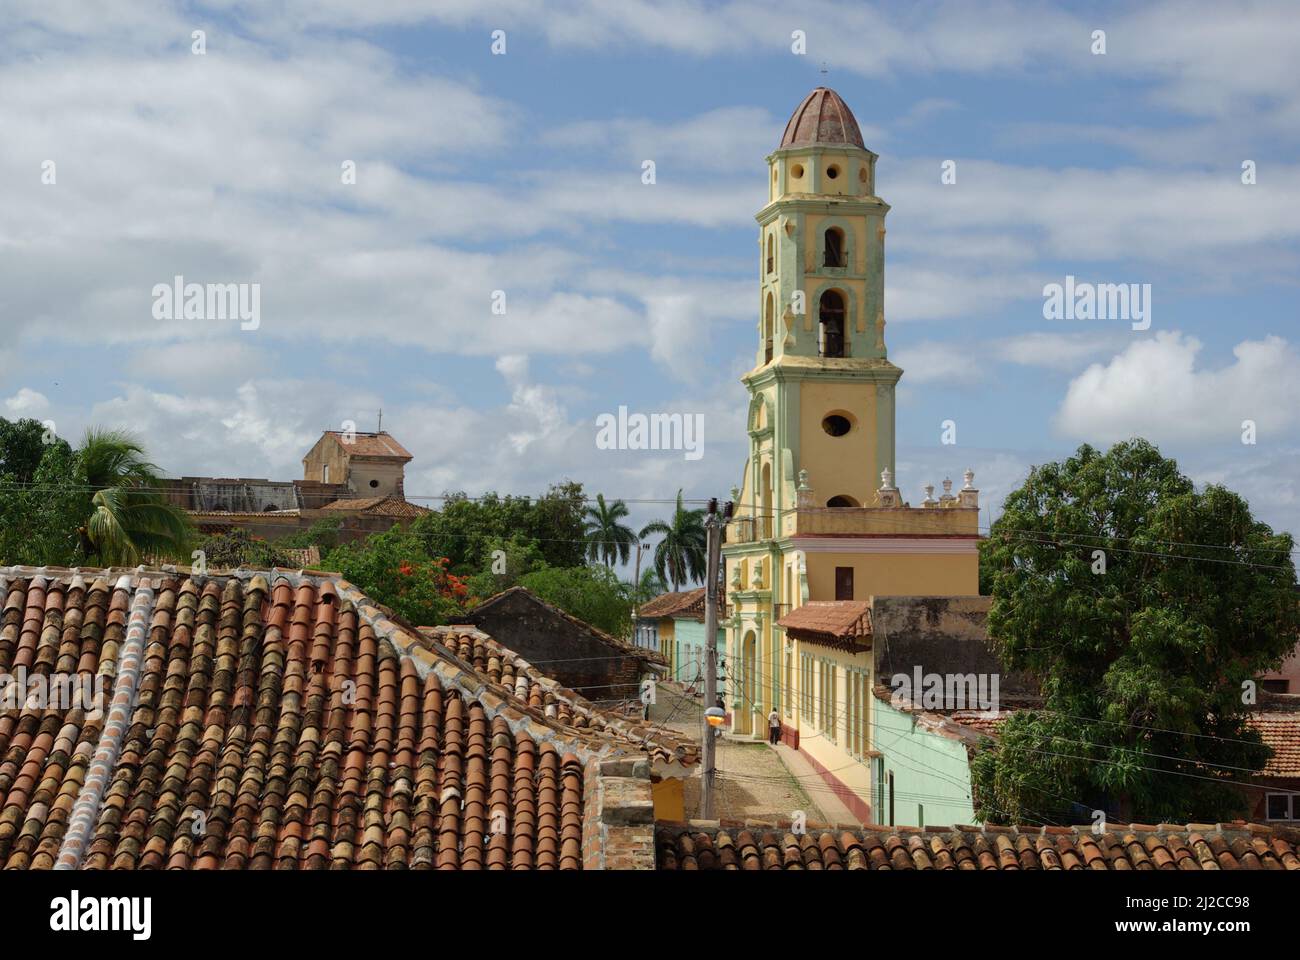 View of the church in the beautiful village of Trinidad, Cuba Stock Photo